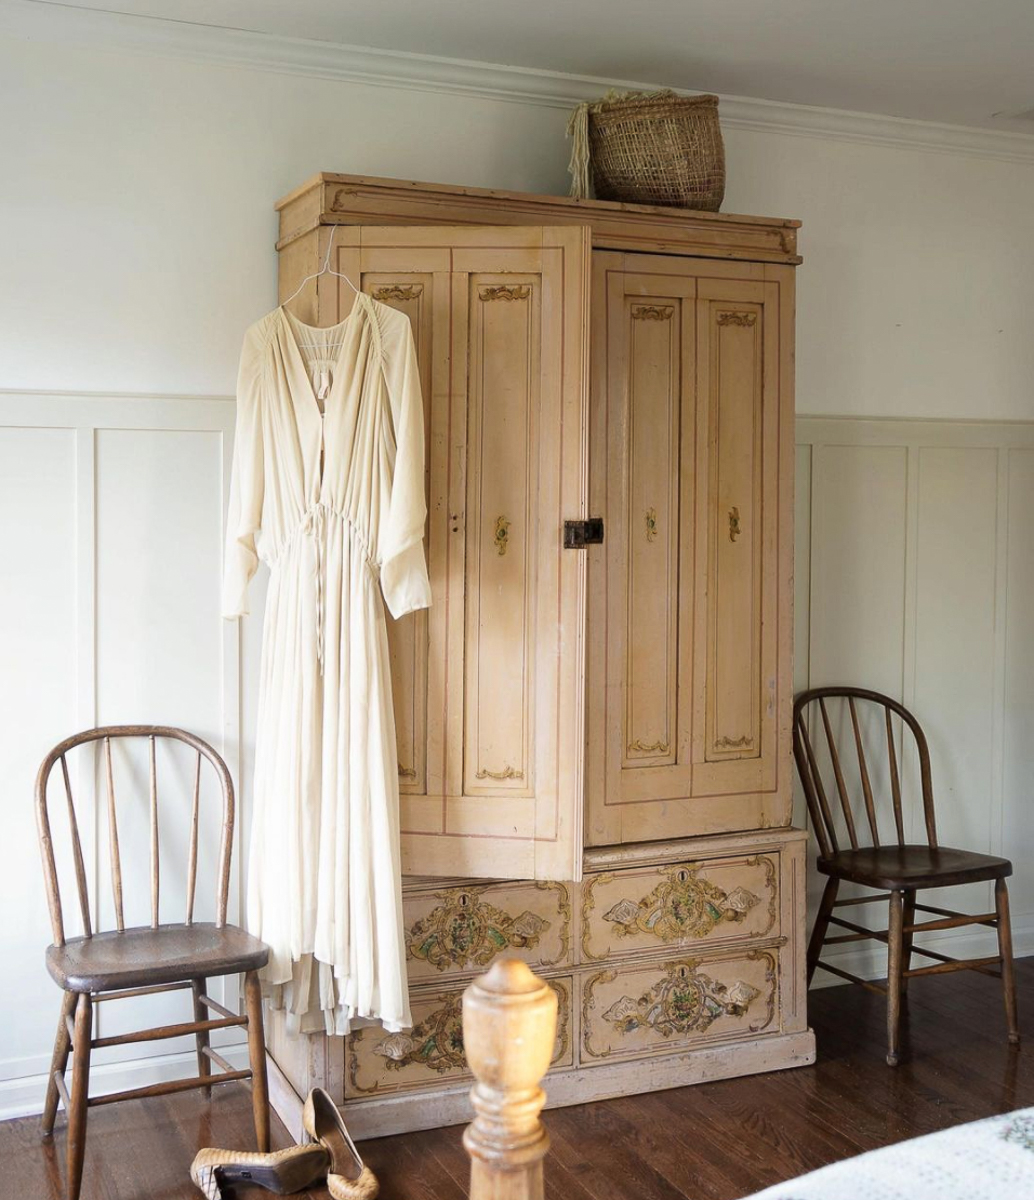 Antique pine armoire stripped and sanded in this farmhouse bedroom kellyelko.com